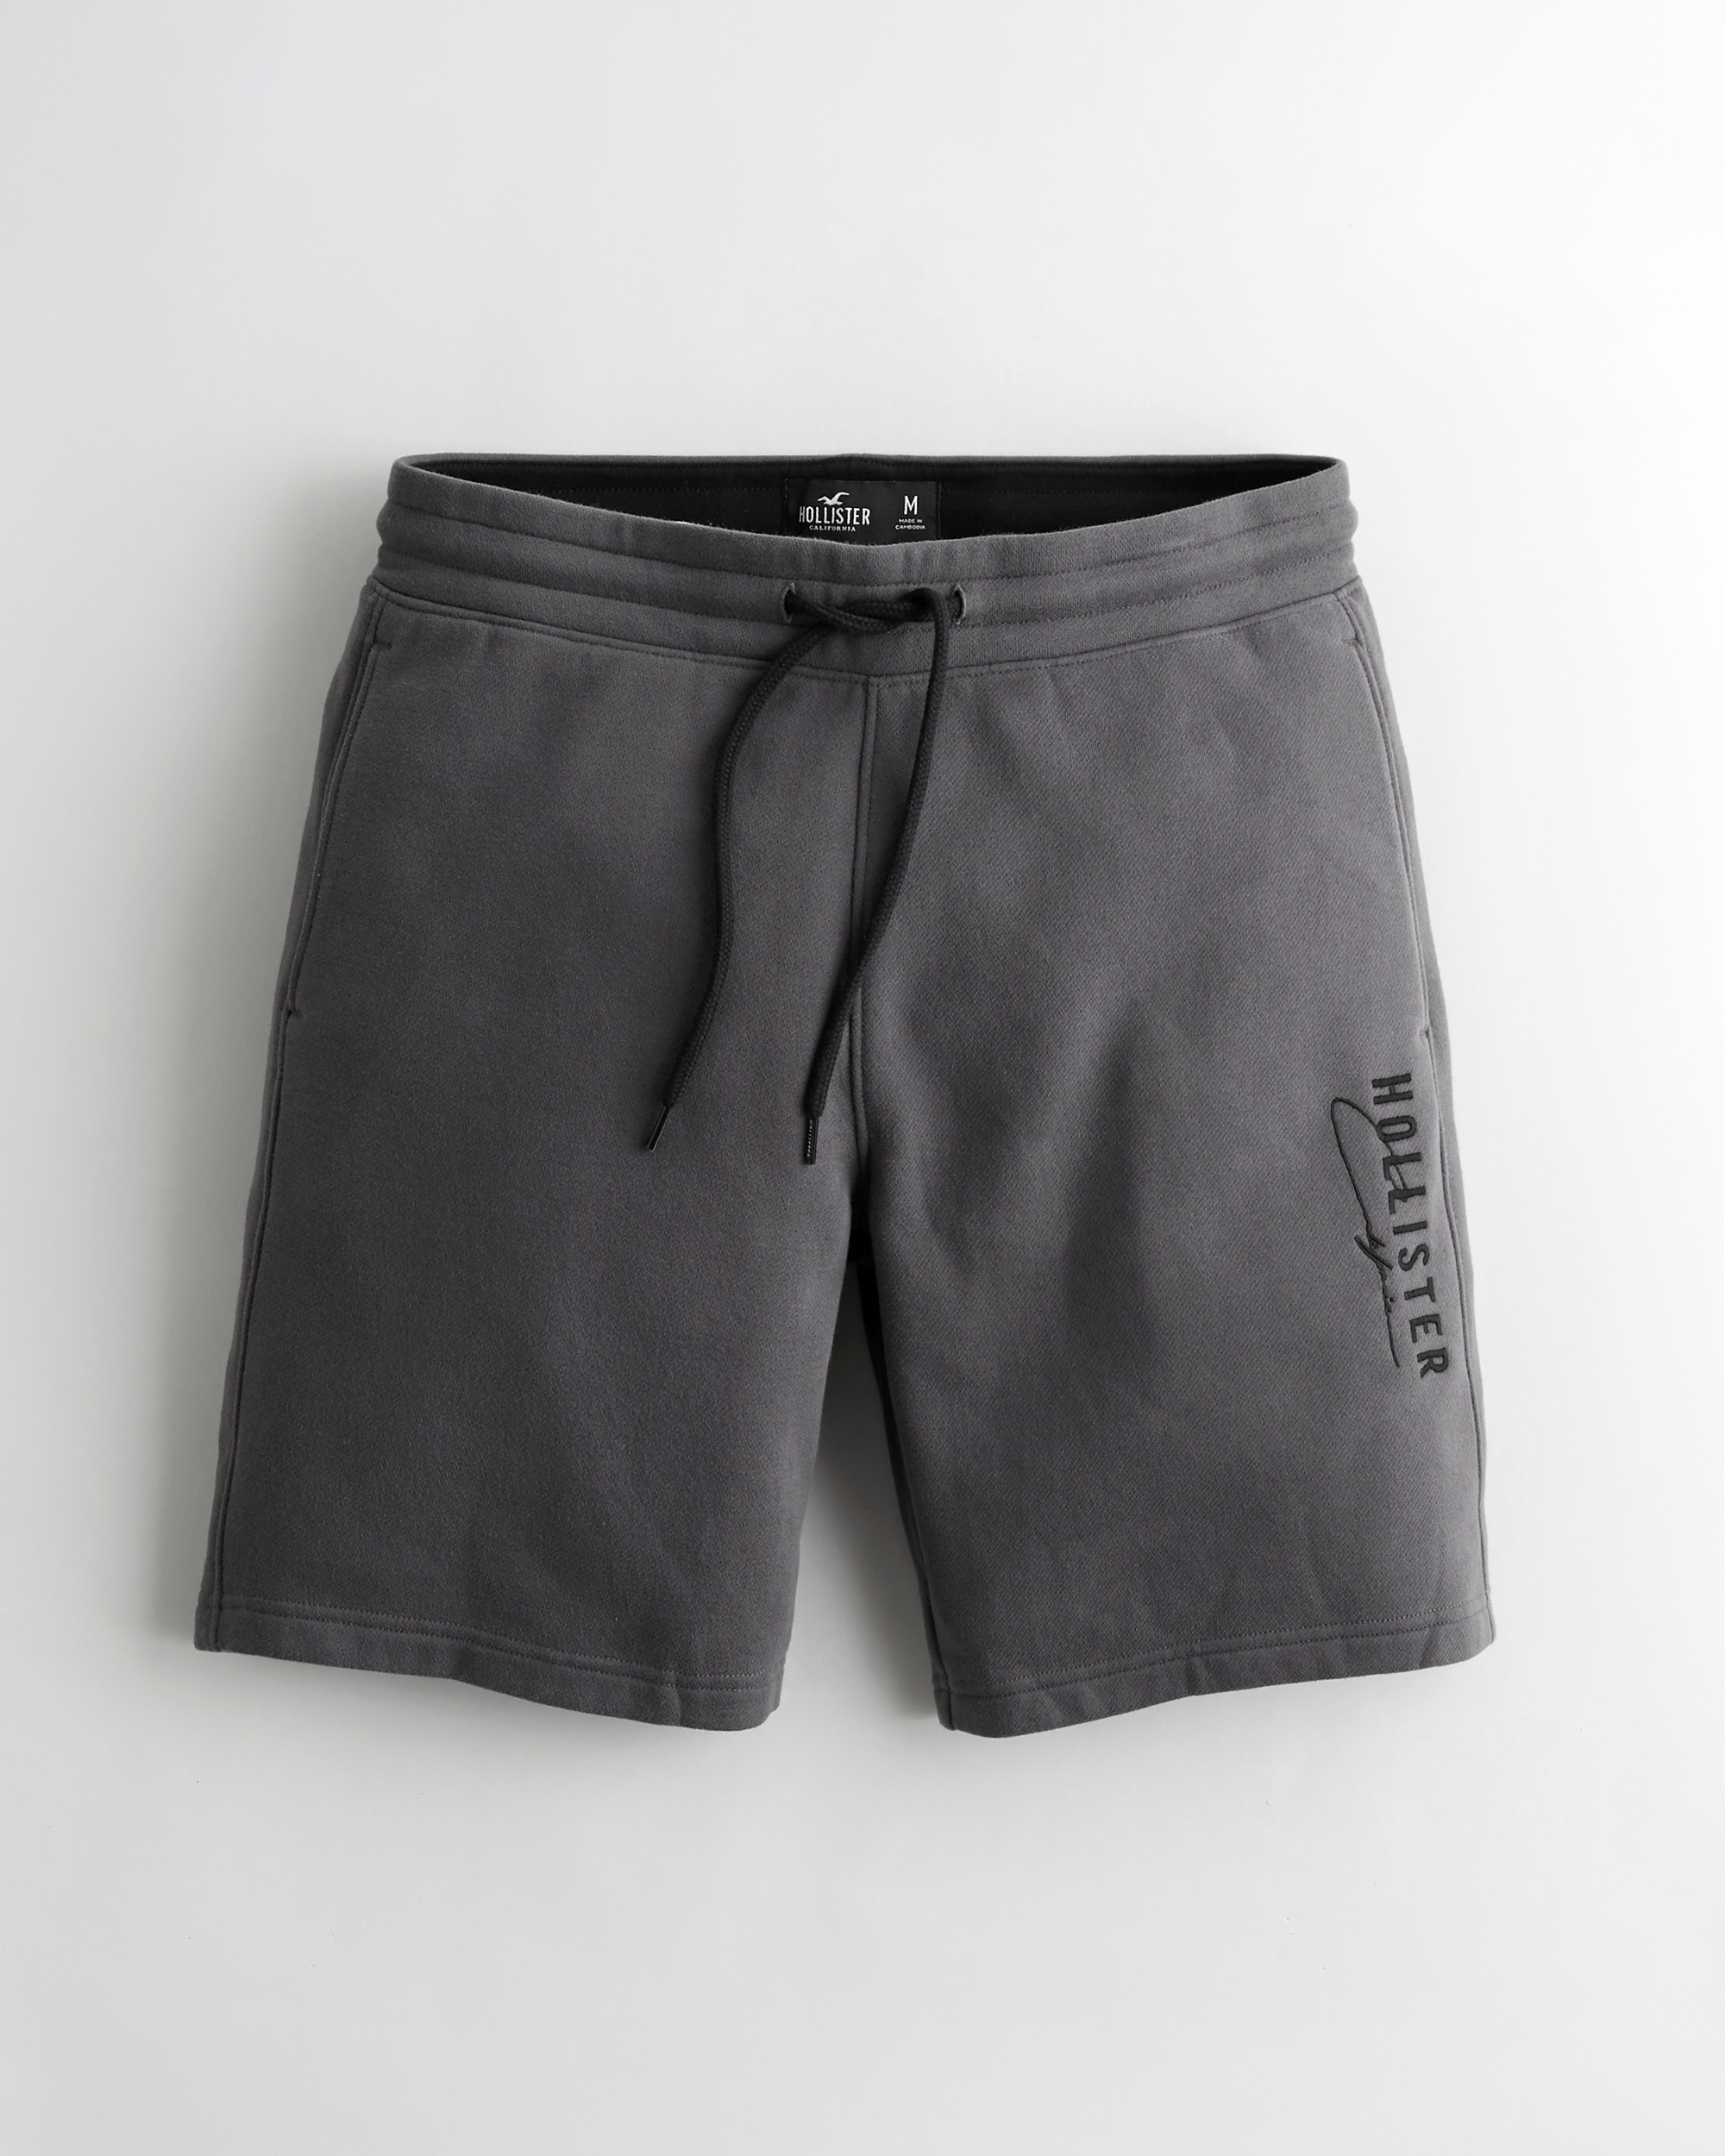 Shorts for Guys | Hollister Co.